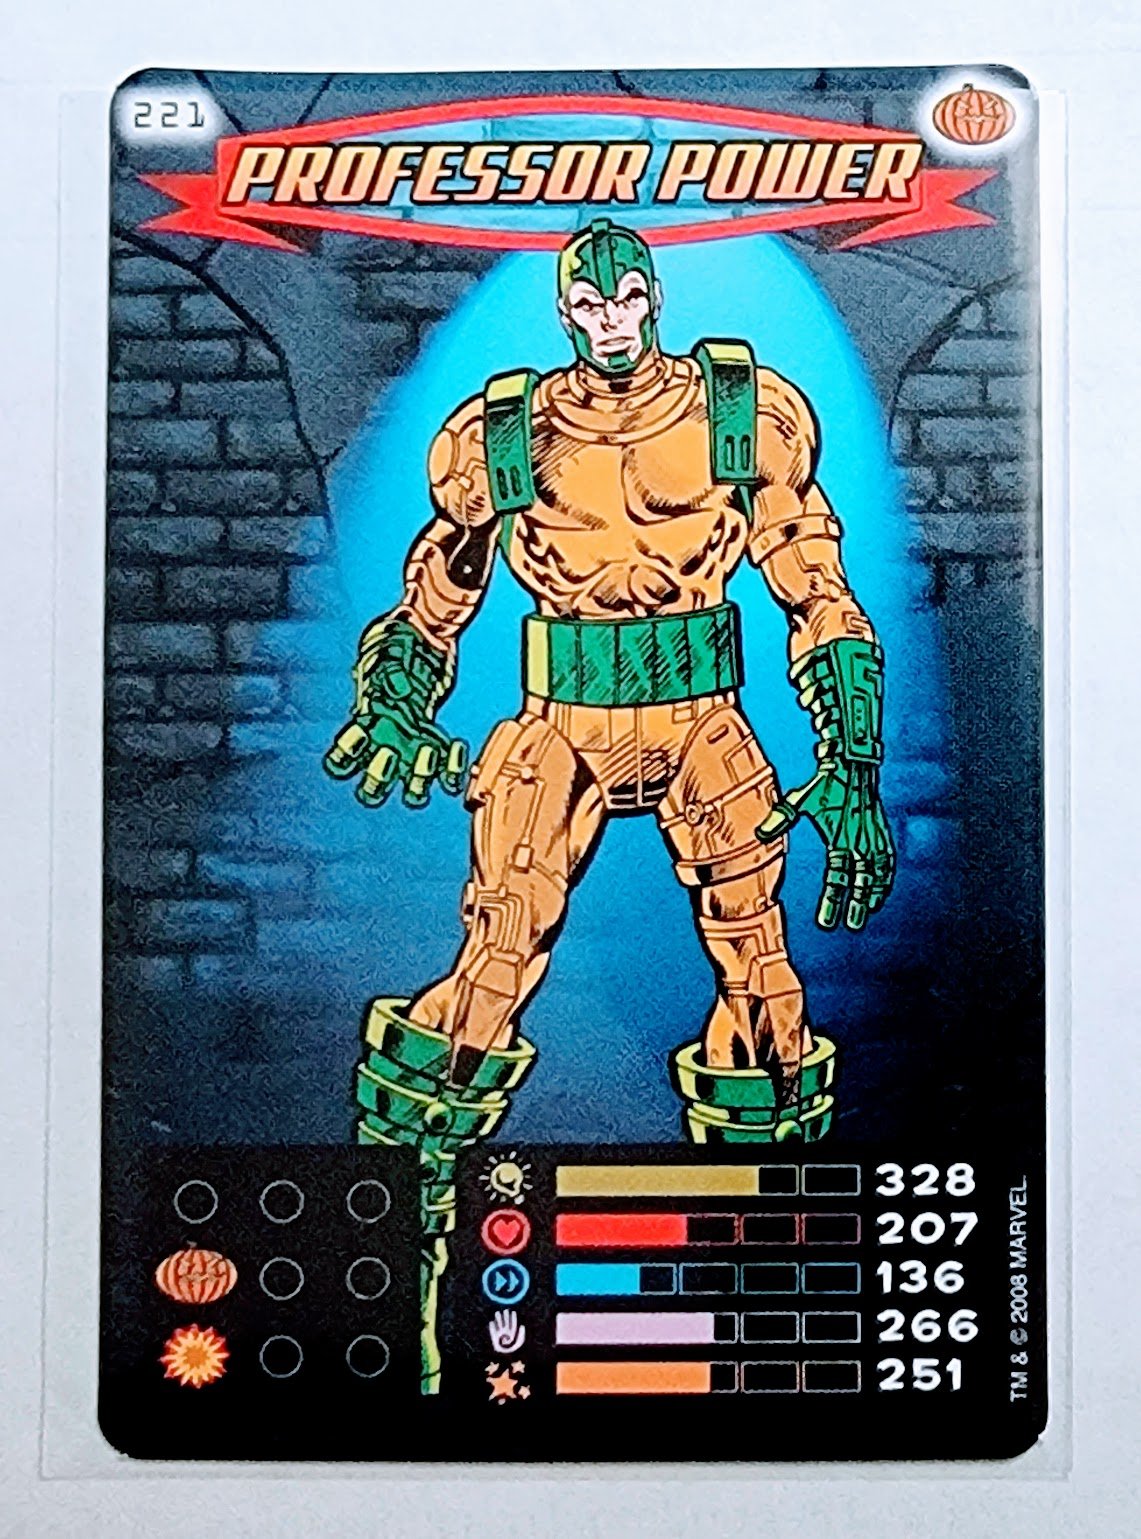 2008 Spiderman Heroes and Villains Professor Power #221 Marvel Booster Trading Card UPTI simple Xclusive Collectibles   